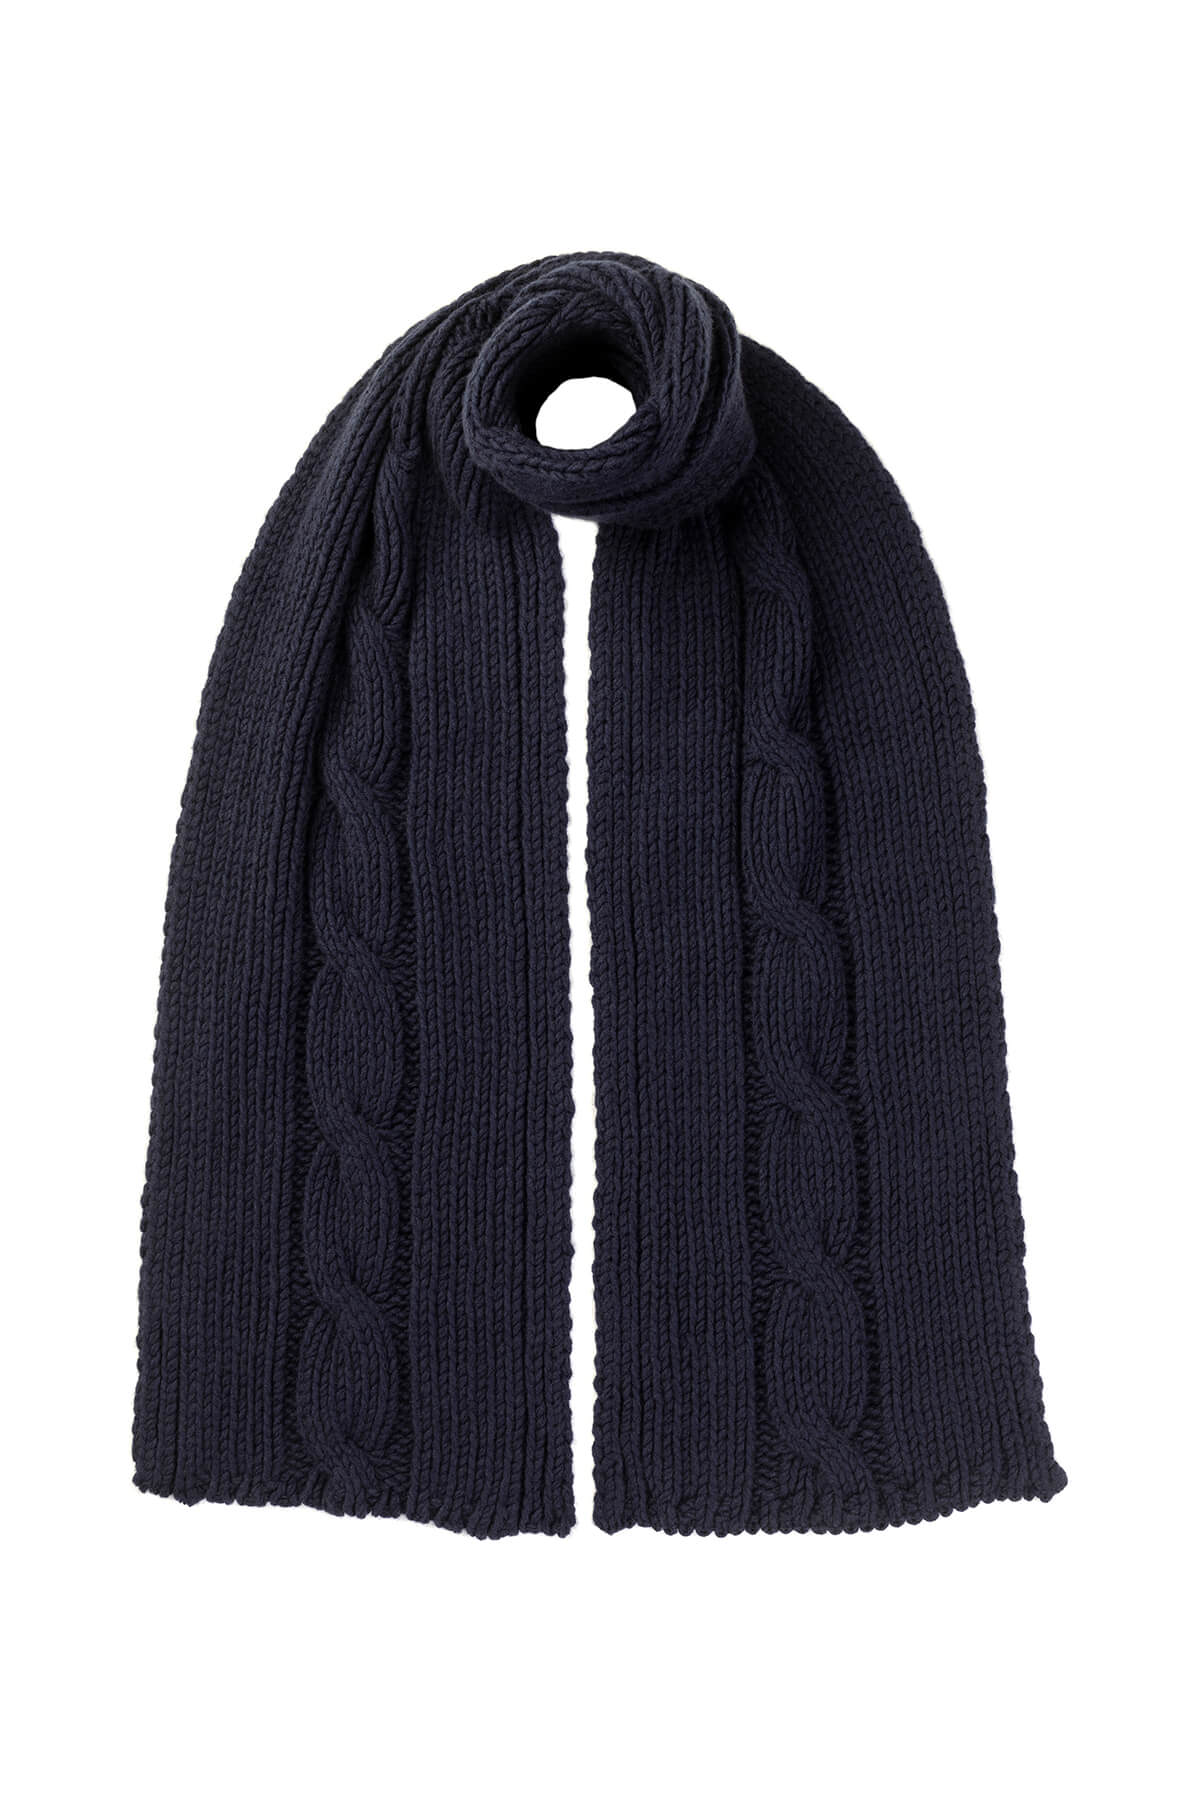 Johnstons of Elgin’s Navy Luxe Chunky Cable Cashmere Scarf on a white background HAB03195SD0707